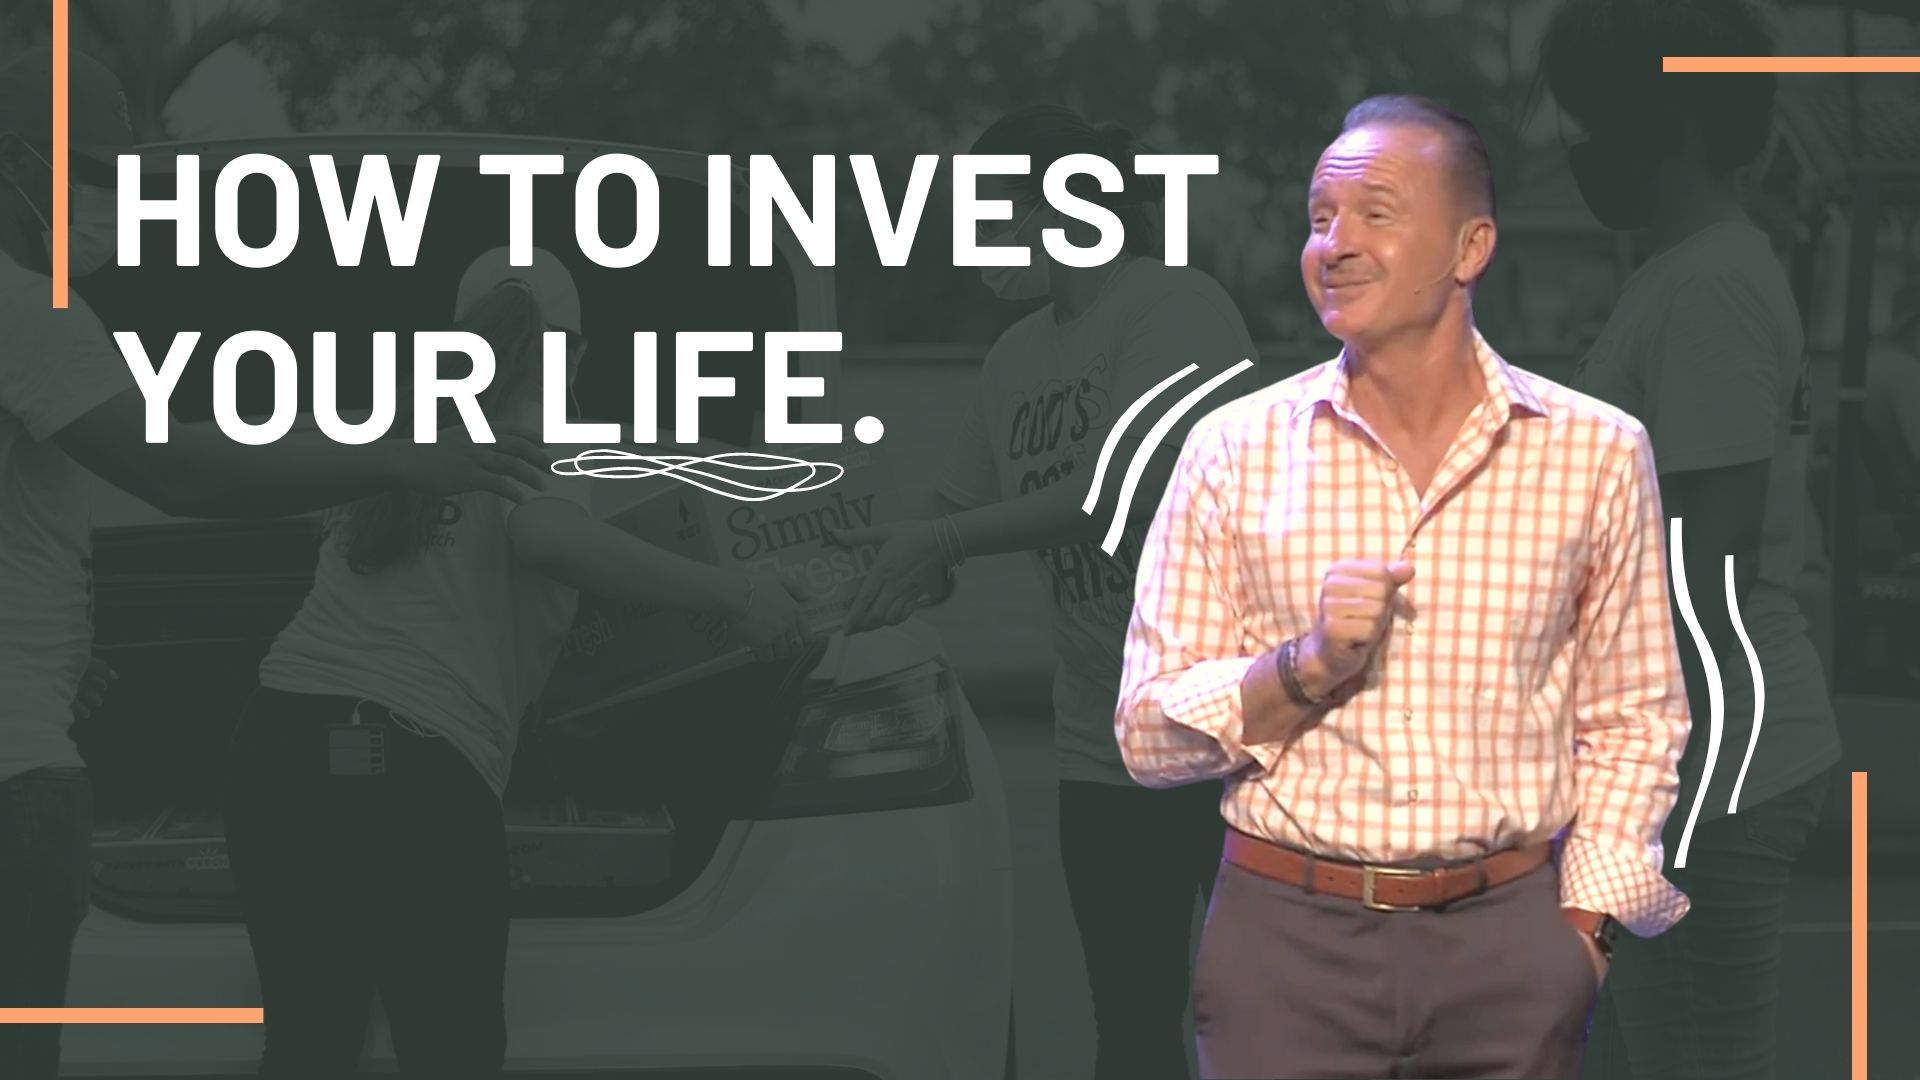 HOW TO INVEST YOUR LIFE. (1)